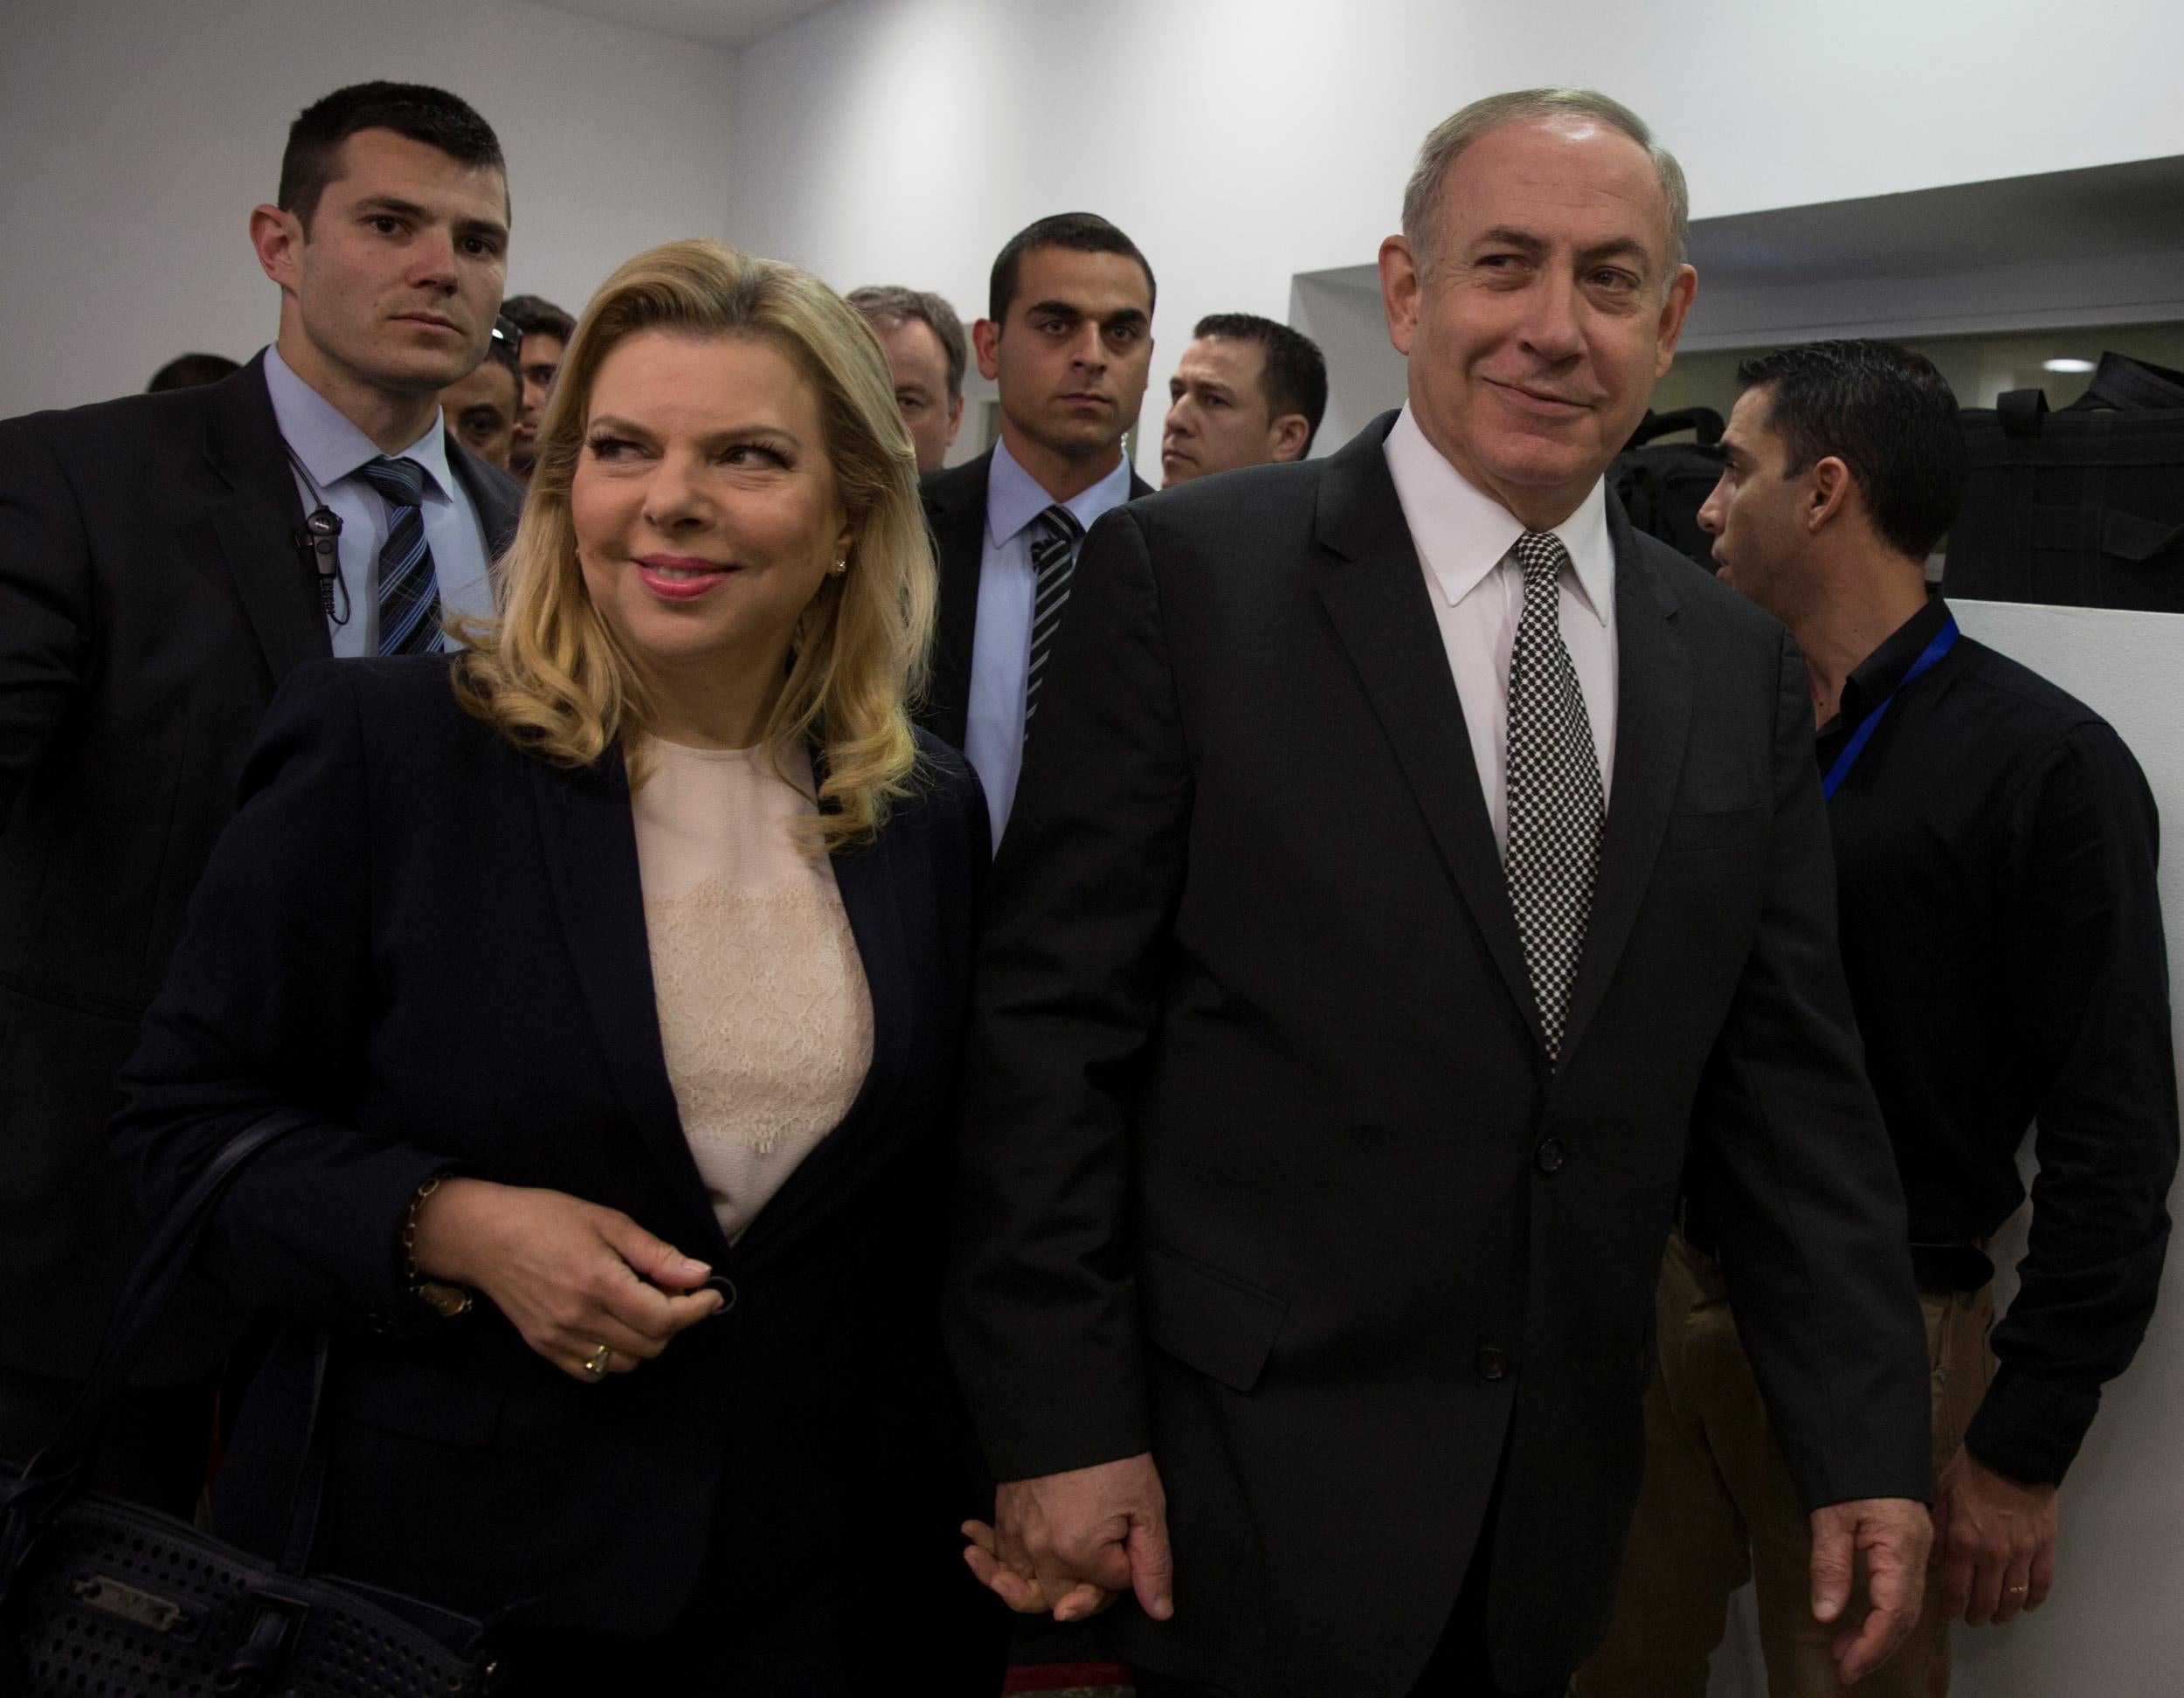 Israeli Prime Minister Benjamin Netanyahu and his wife Sara arrive at court to testify in a libel lawsuit they filed against an Israeli journalist in Tel Aviv on March 14, 2017